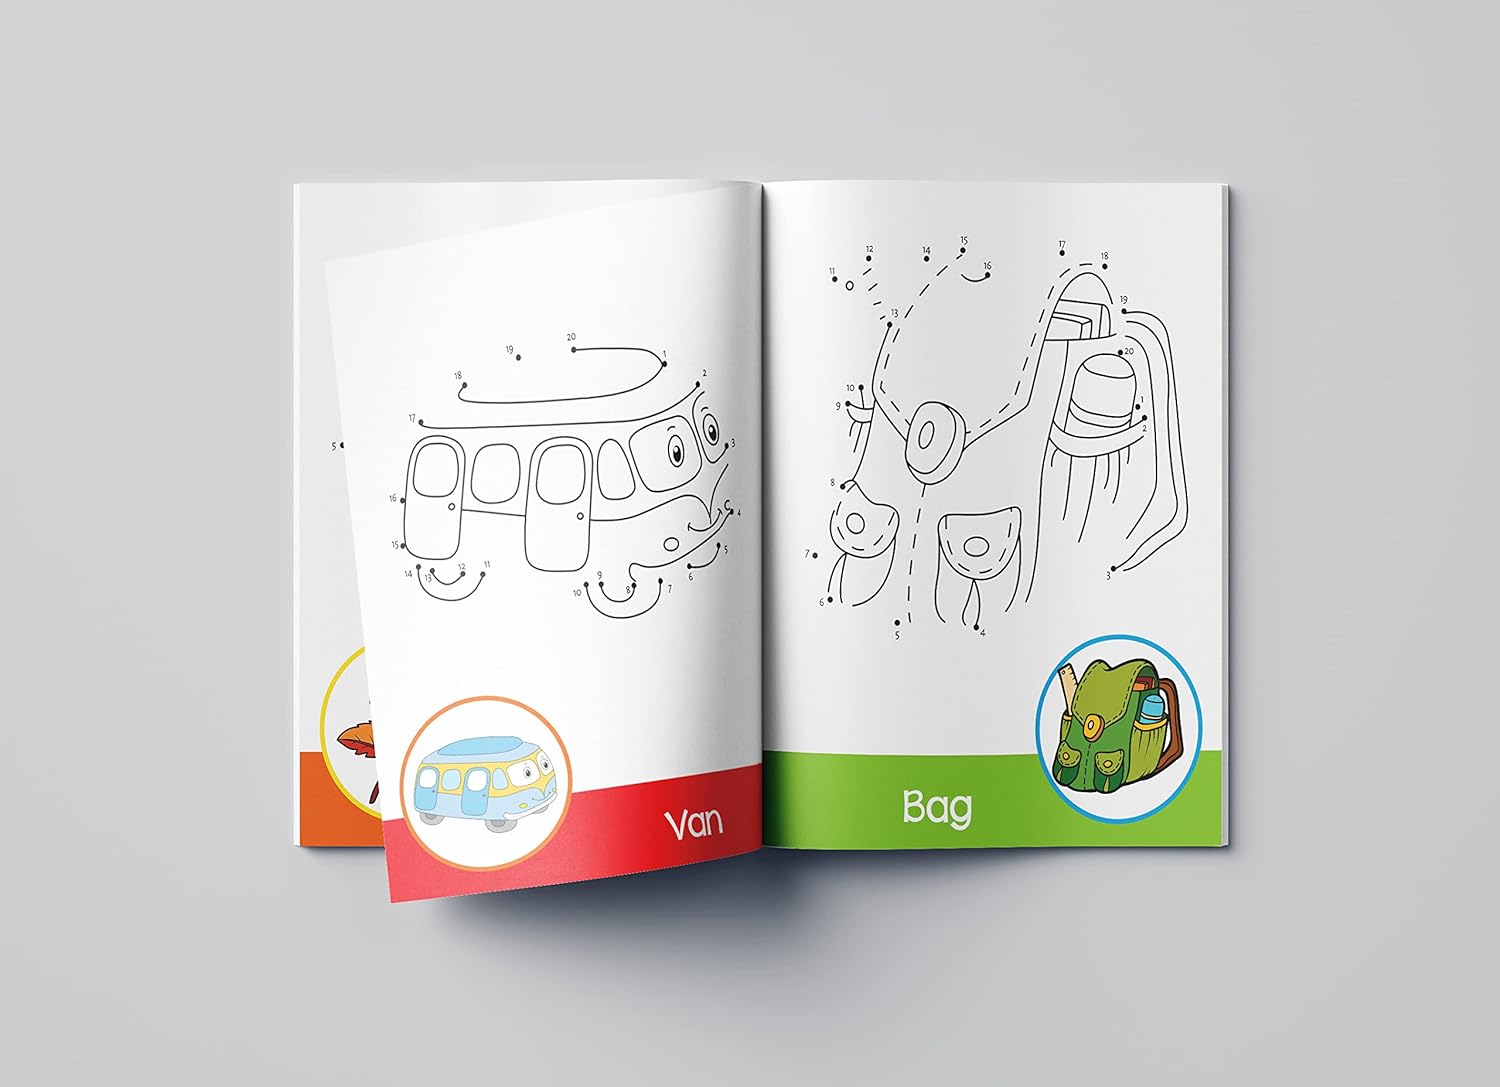 Dot-To-Dot - Tracing and Coloring Activity Book For Age 2+